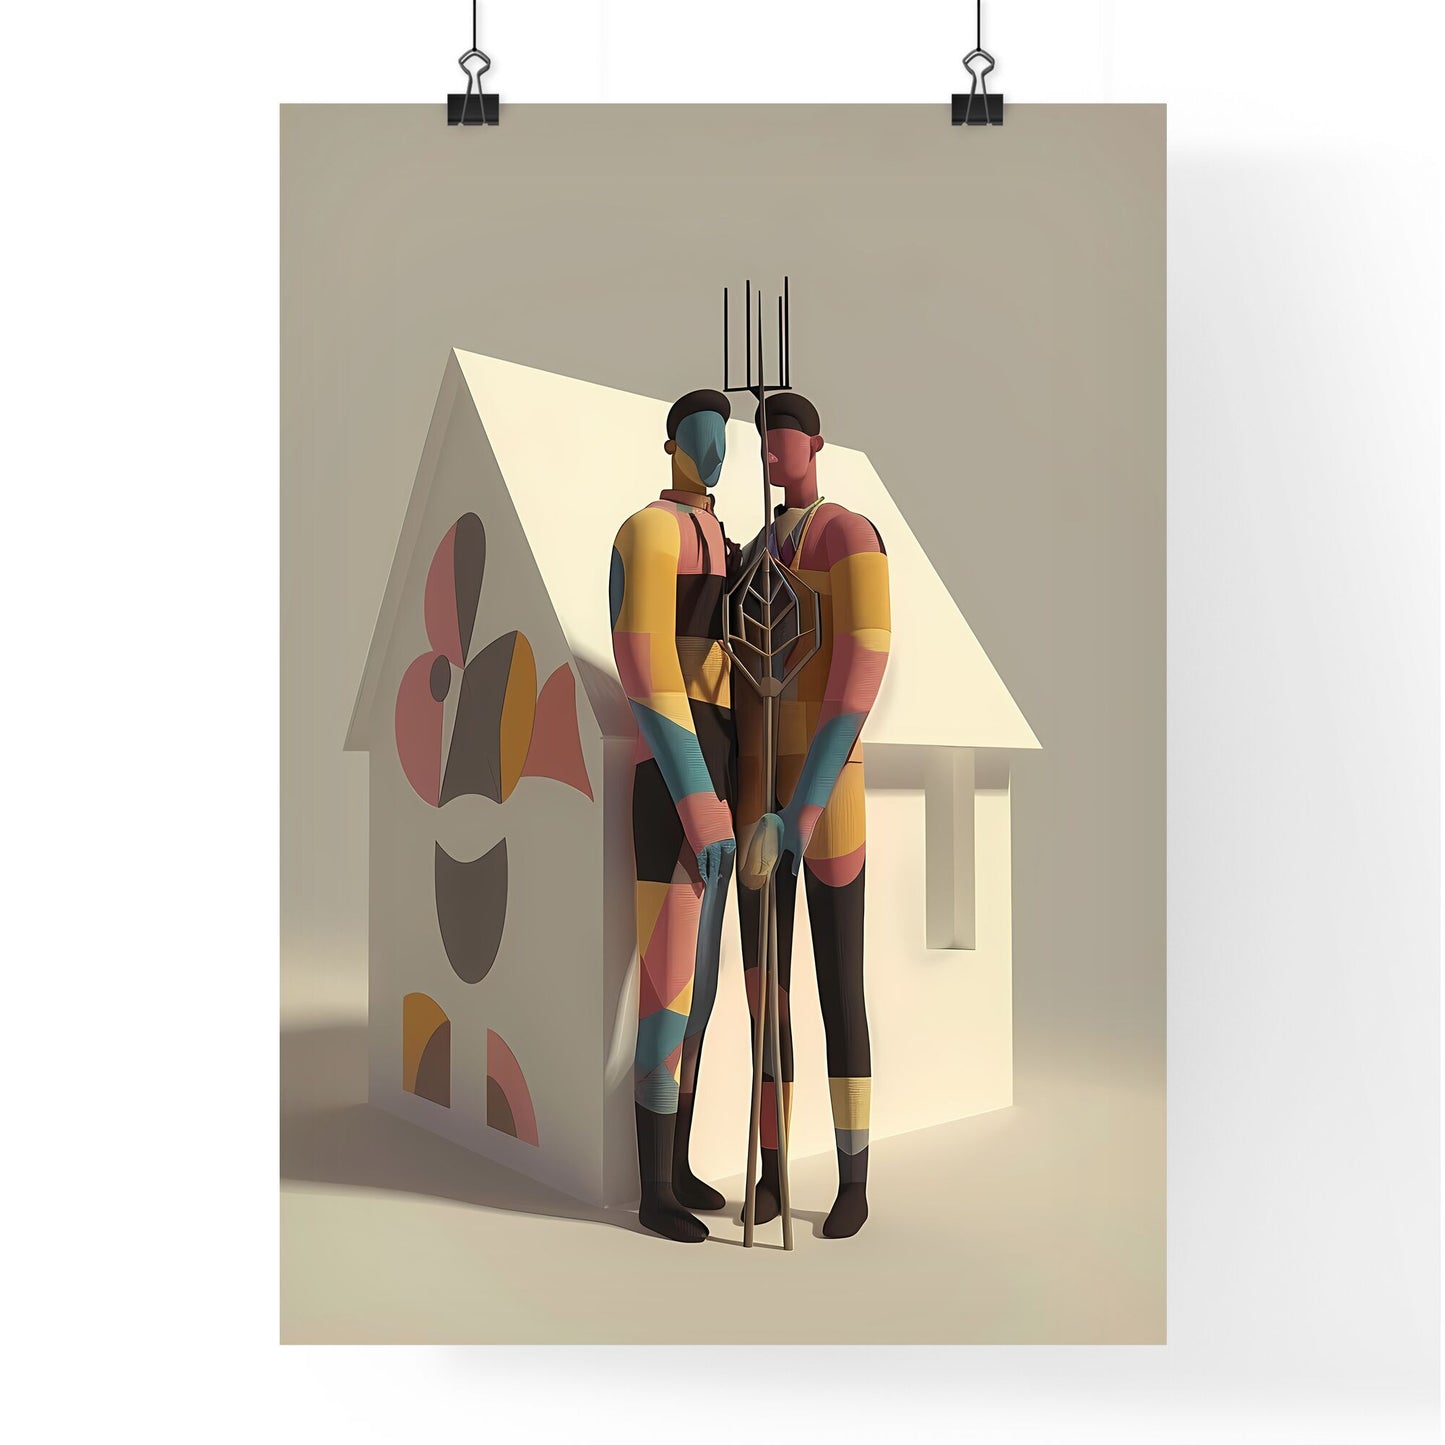 Bauhaus Men in American Gothic Pose with Geometric Abstract Pitchfork Default Title